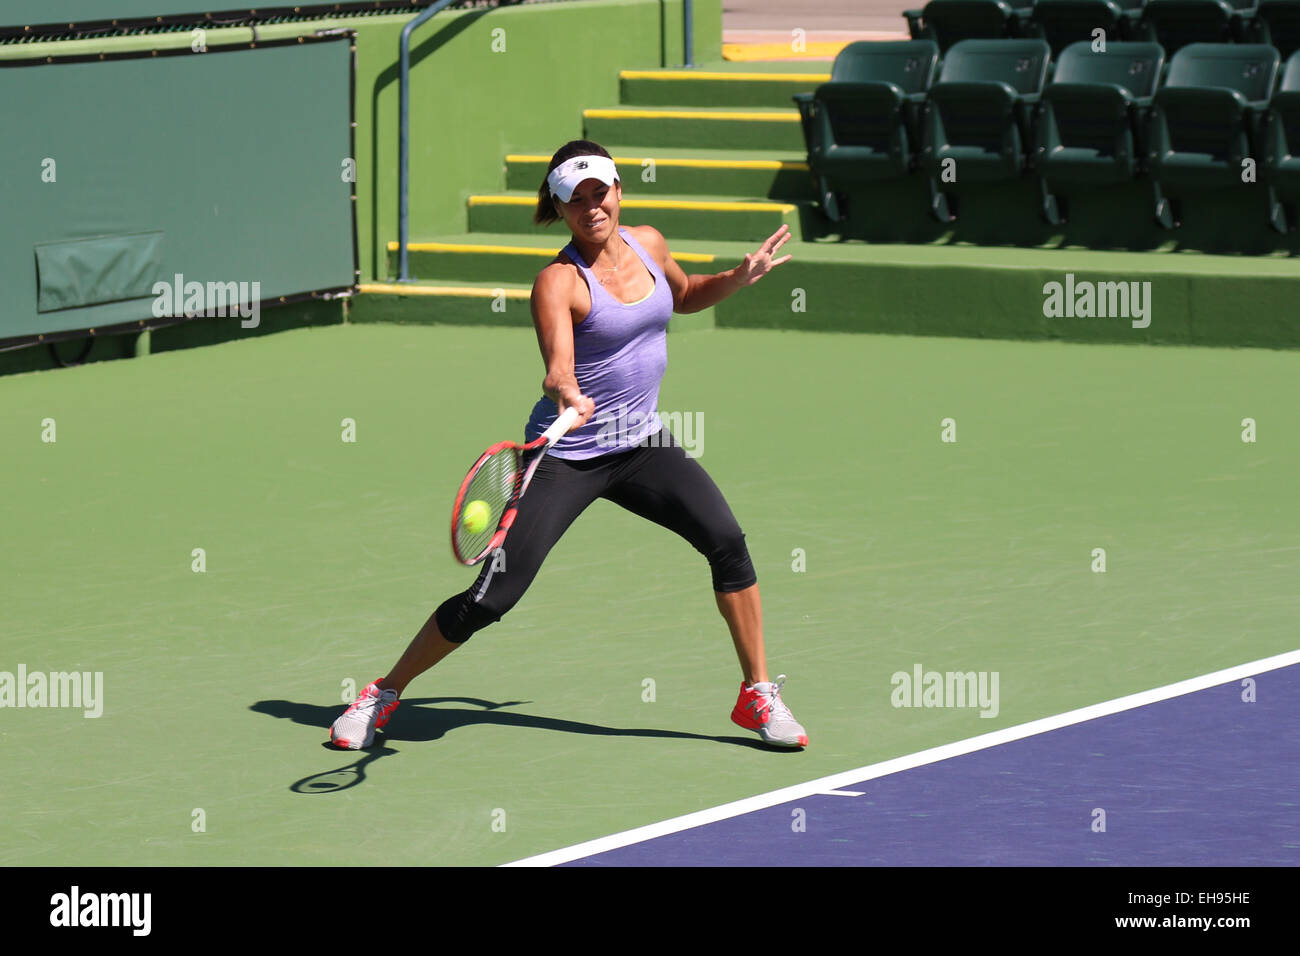 Indian Wells, California 9th March, 2015 British tennis player Heather Watson's practice session at the BNP Paribas Open. Credit: Werner Fotos/Alamy Live News Stock Photo